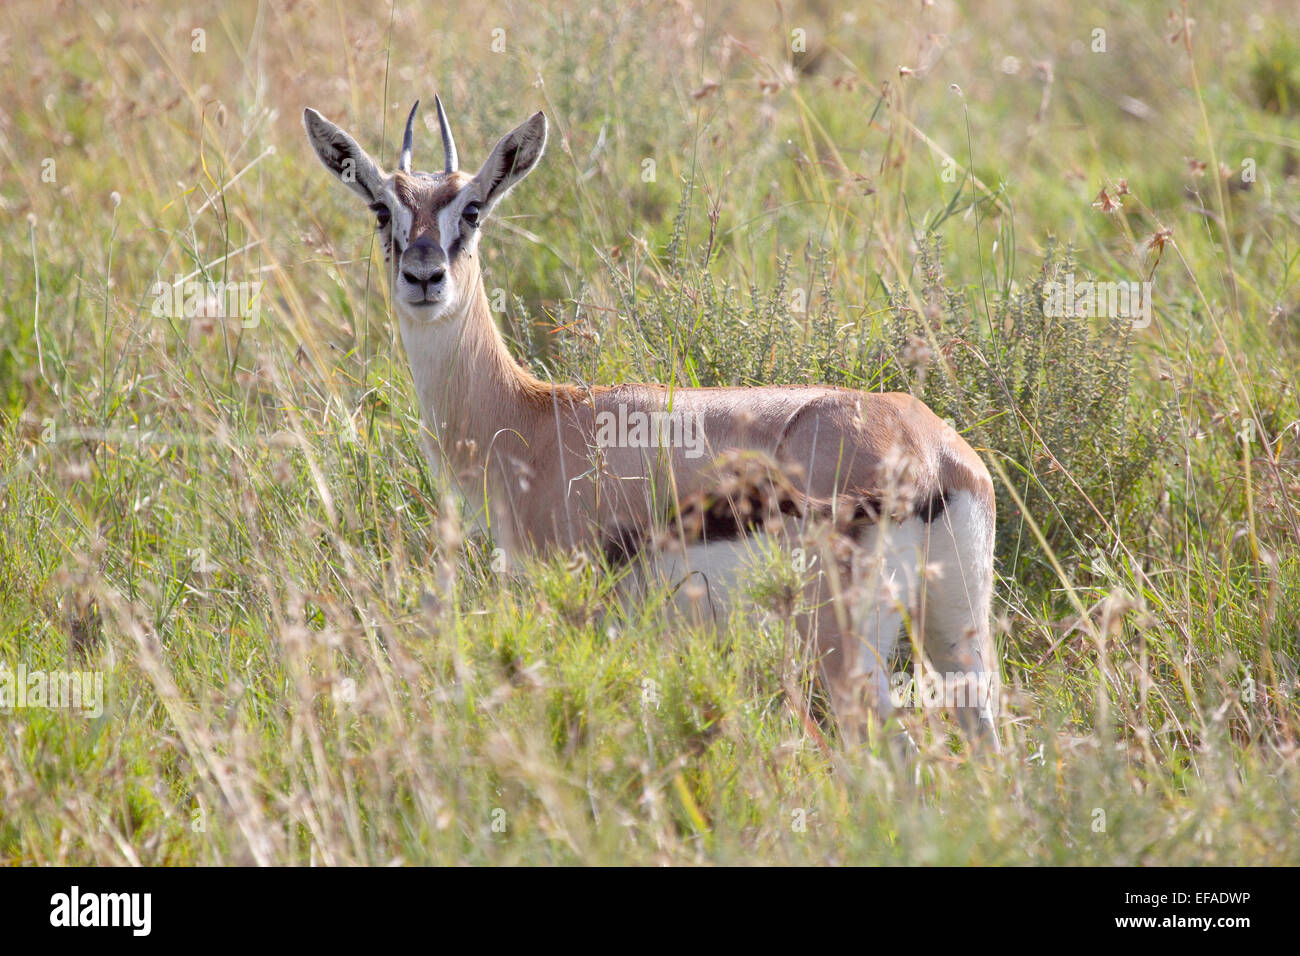 A young Thomson's gazelle (Eudorcas thomsonii) looking at camera in Serengeti National Park, Tanzania Stock Photo